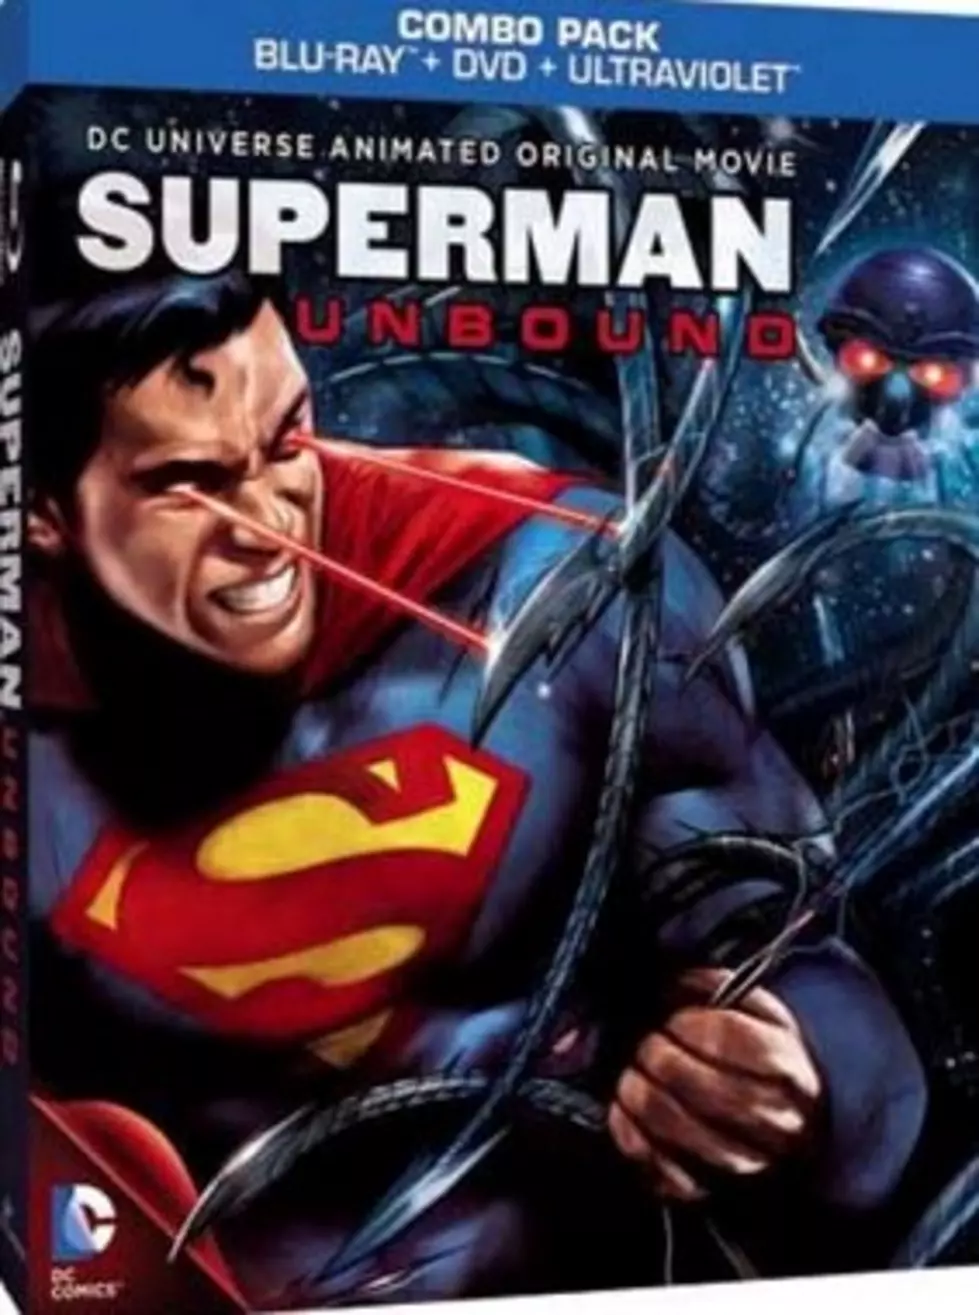 WIN A ‘SUPERMAN UNBOUND’ COMBO PACK!